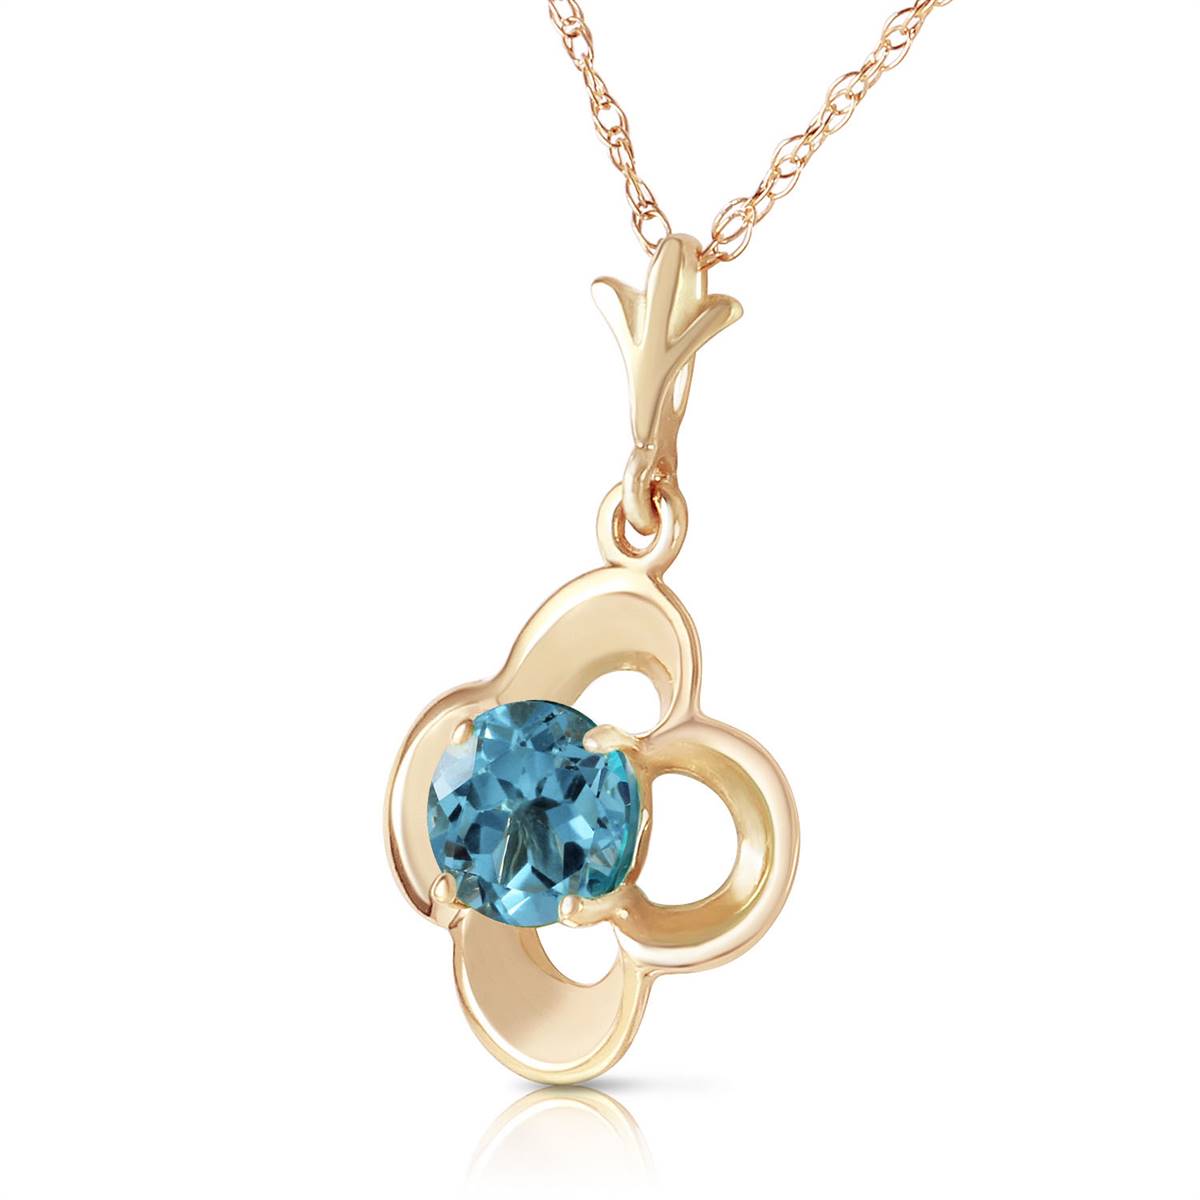 0.55 Carat 14K Solid Yellow Gold Ladies Who Lunch Blue Topaz Necklace